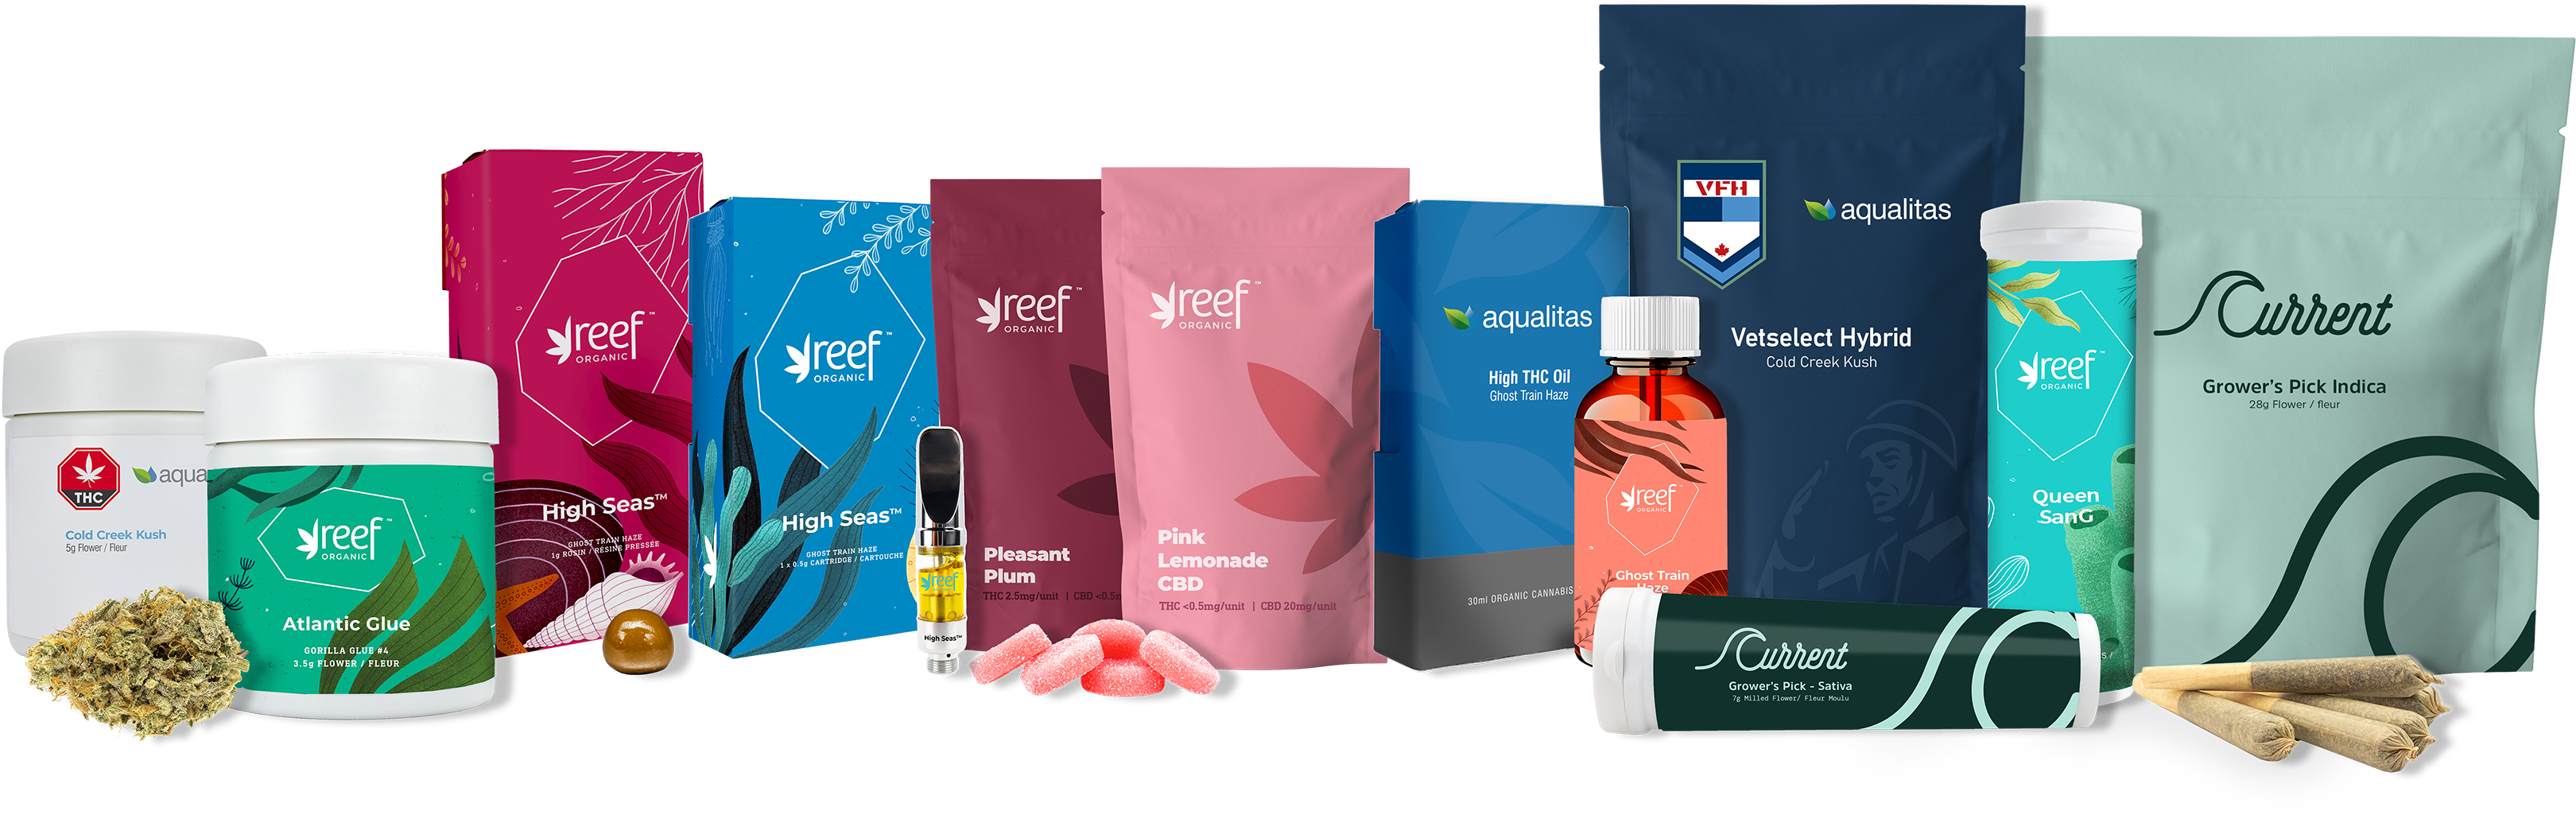 Aqualitas family of Brands: Reef Organic, Current